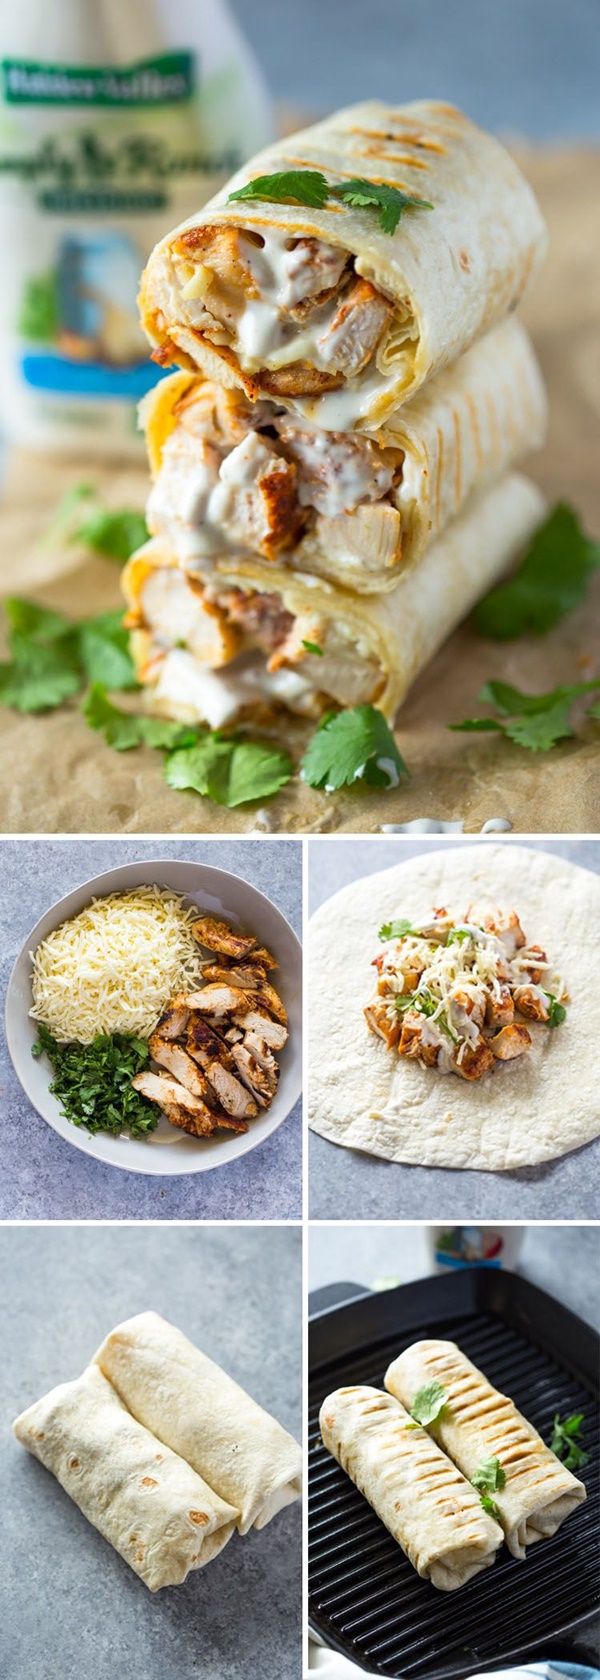 Delicious Dinners Ideas That Come Together In 30 Minutes